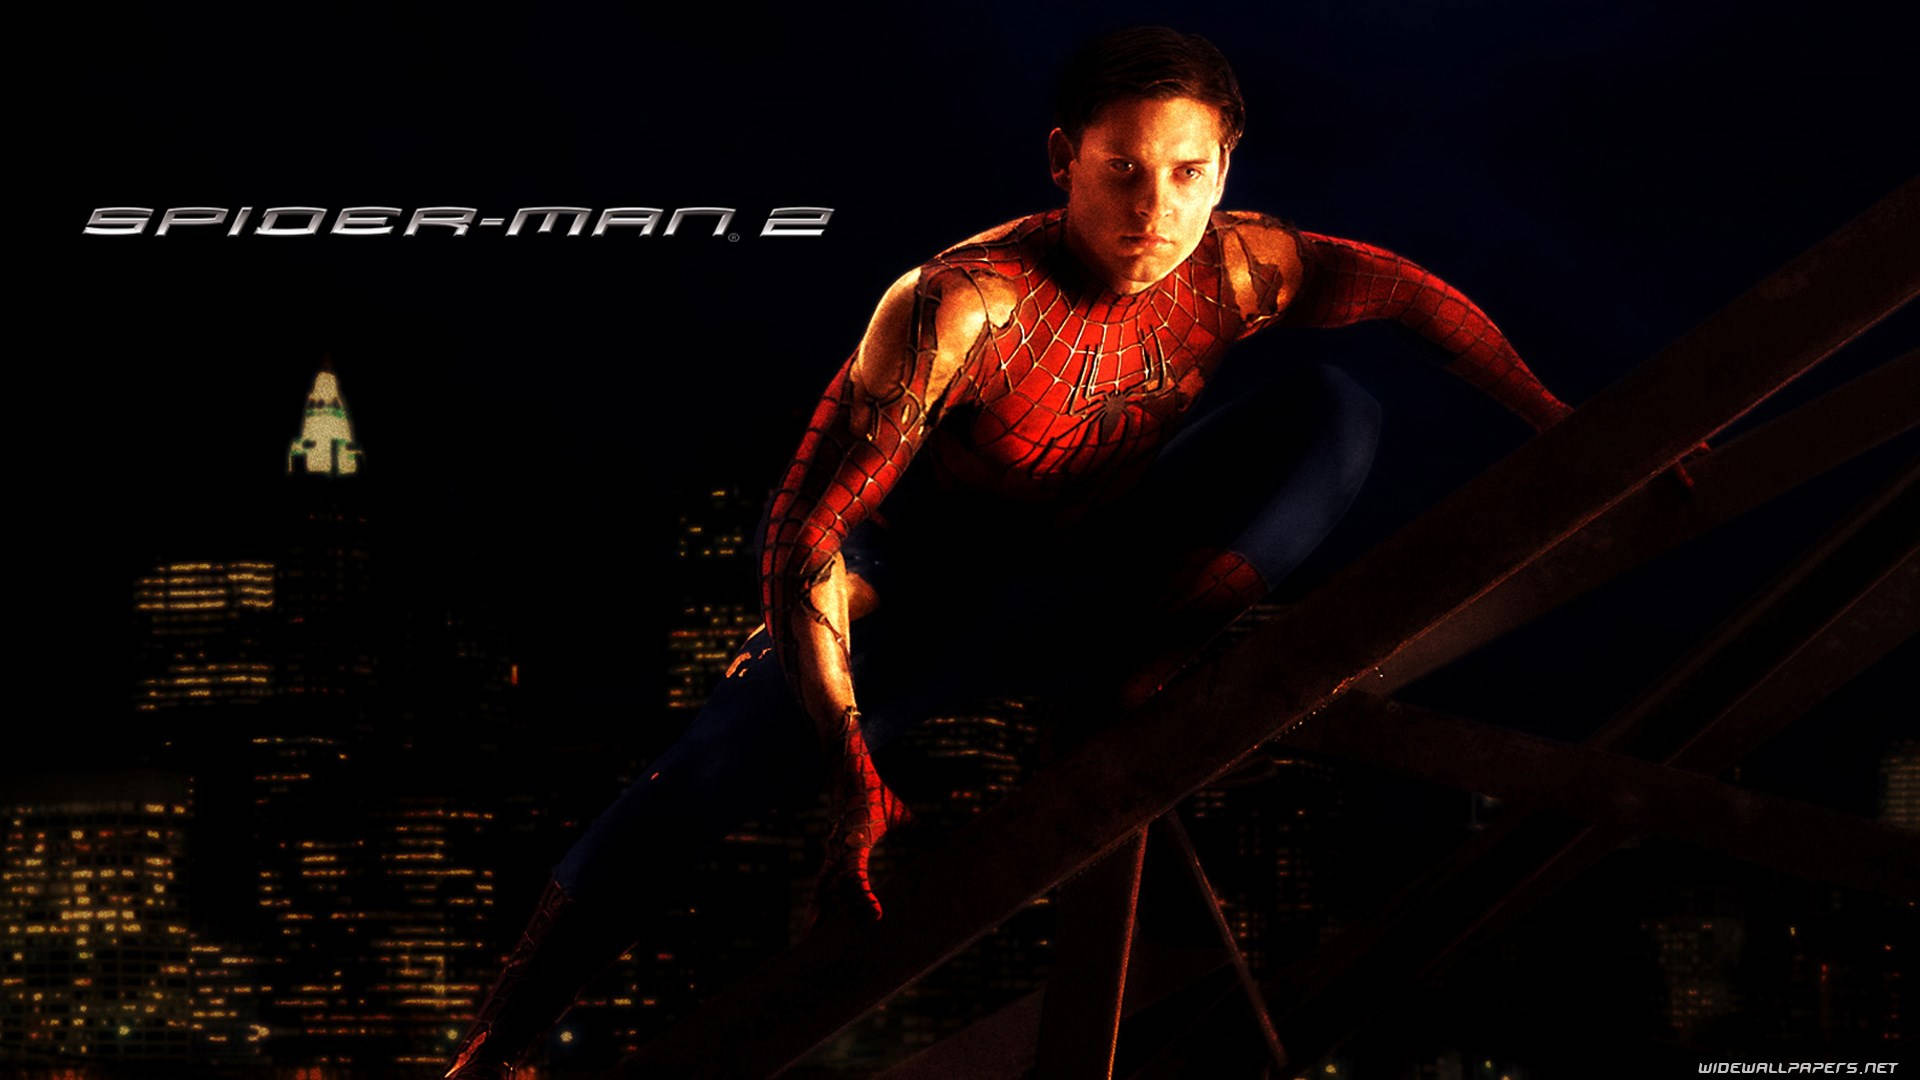 Download Tobey Maguire In Ripped Spider-Man Suit Wallpaper